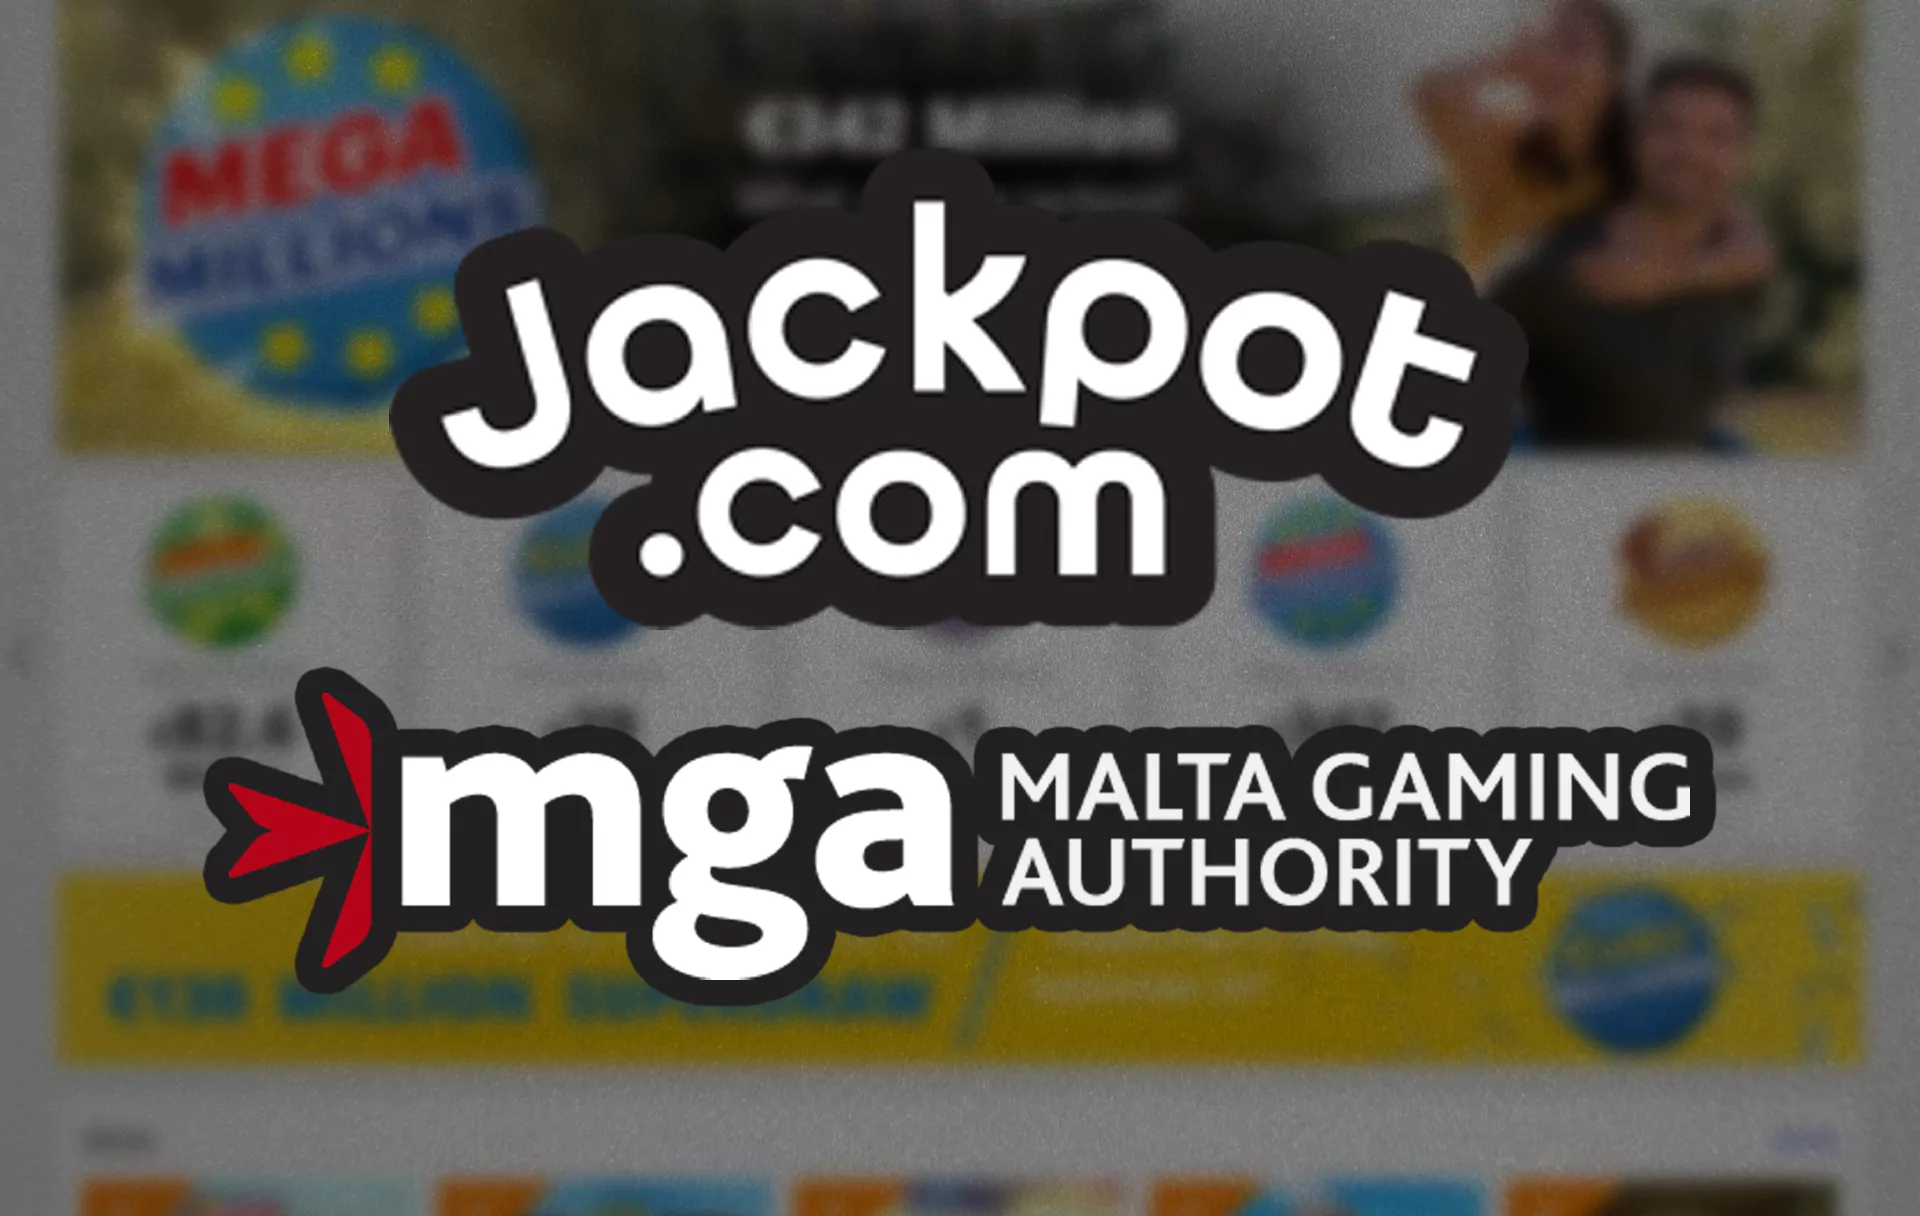 Jackpot.com works under the Malta Gaming Authority, so you can be sure that it is a legal and secure betting site.